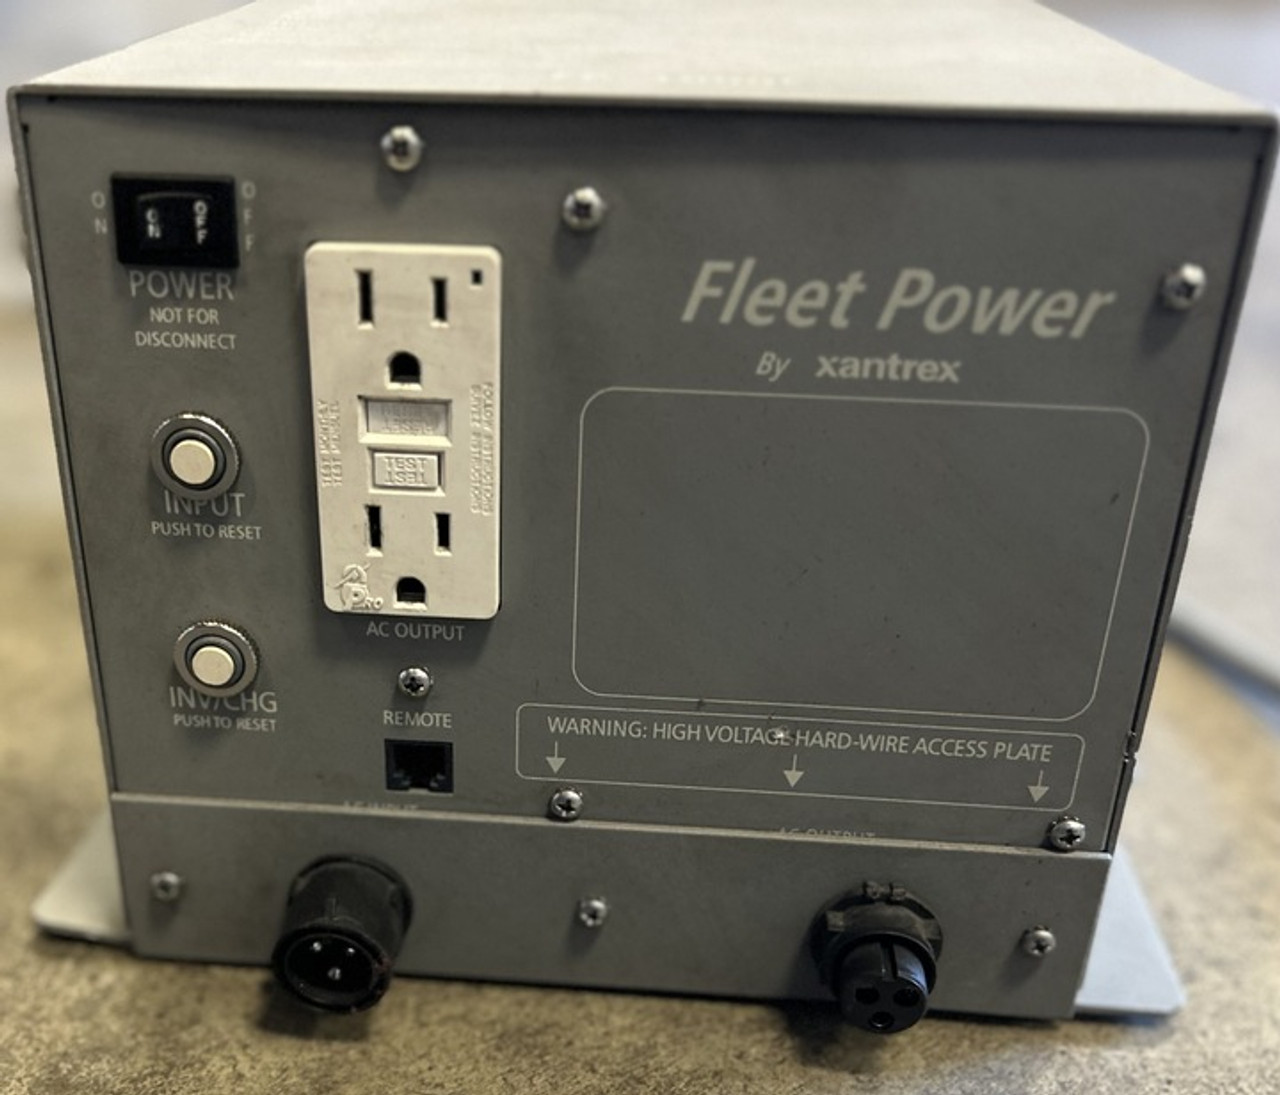 Xantrex Fleet Power 1000 W Inverter WITH POWER CABLES